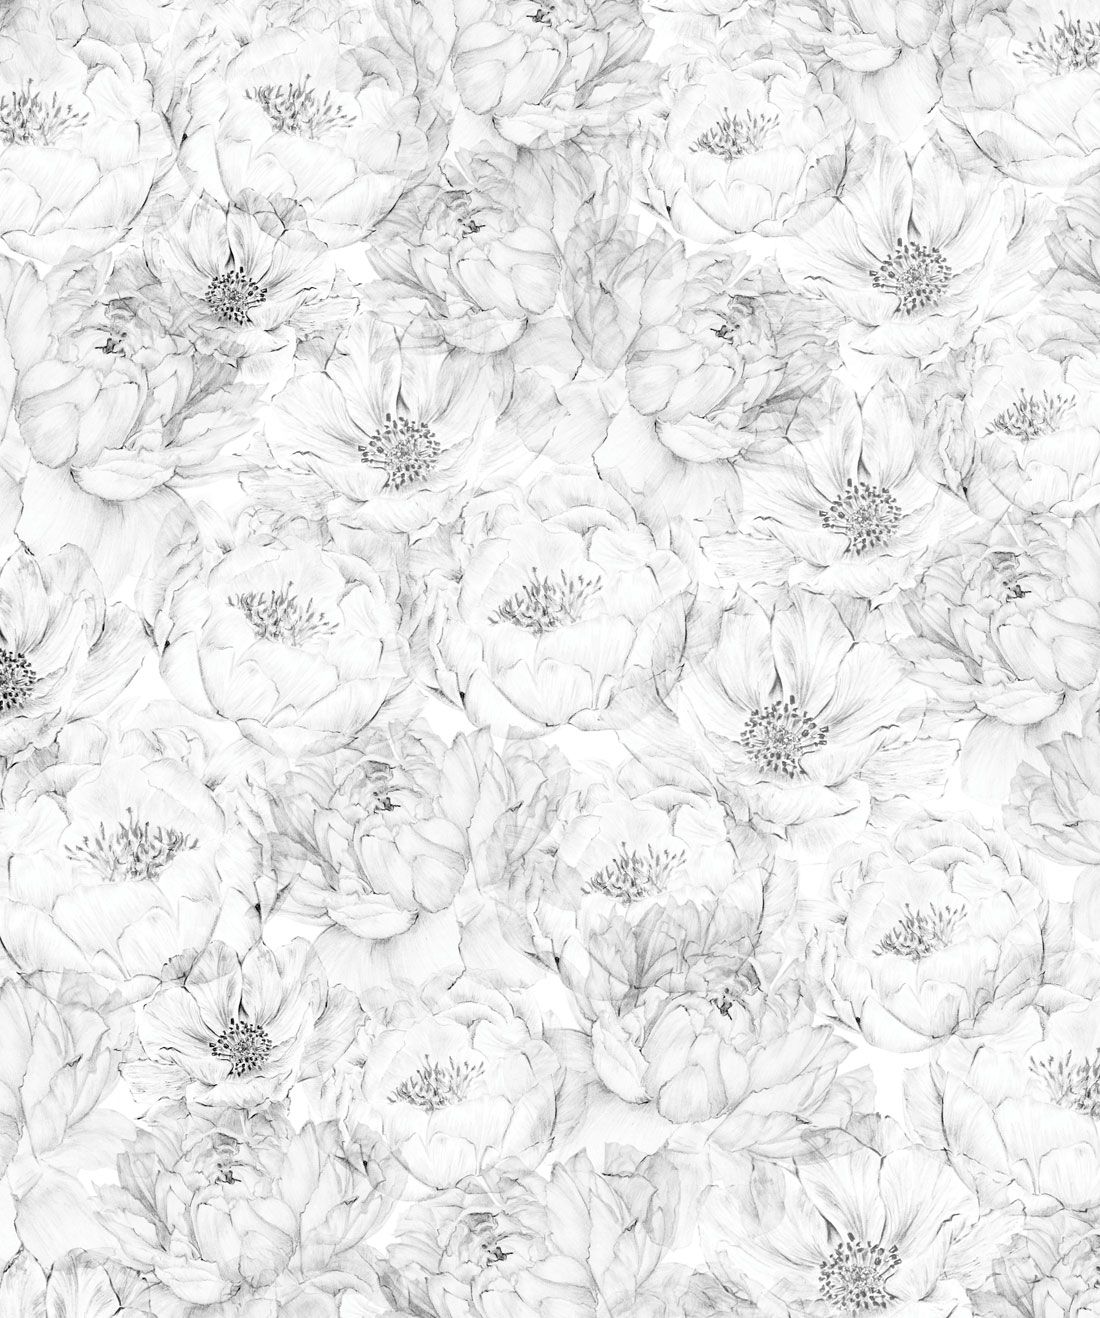 Peonies & Anemones (Large) is a neutral floral wallpaper